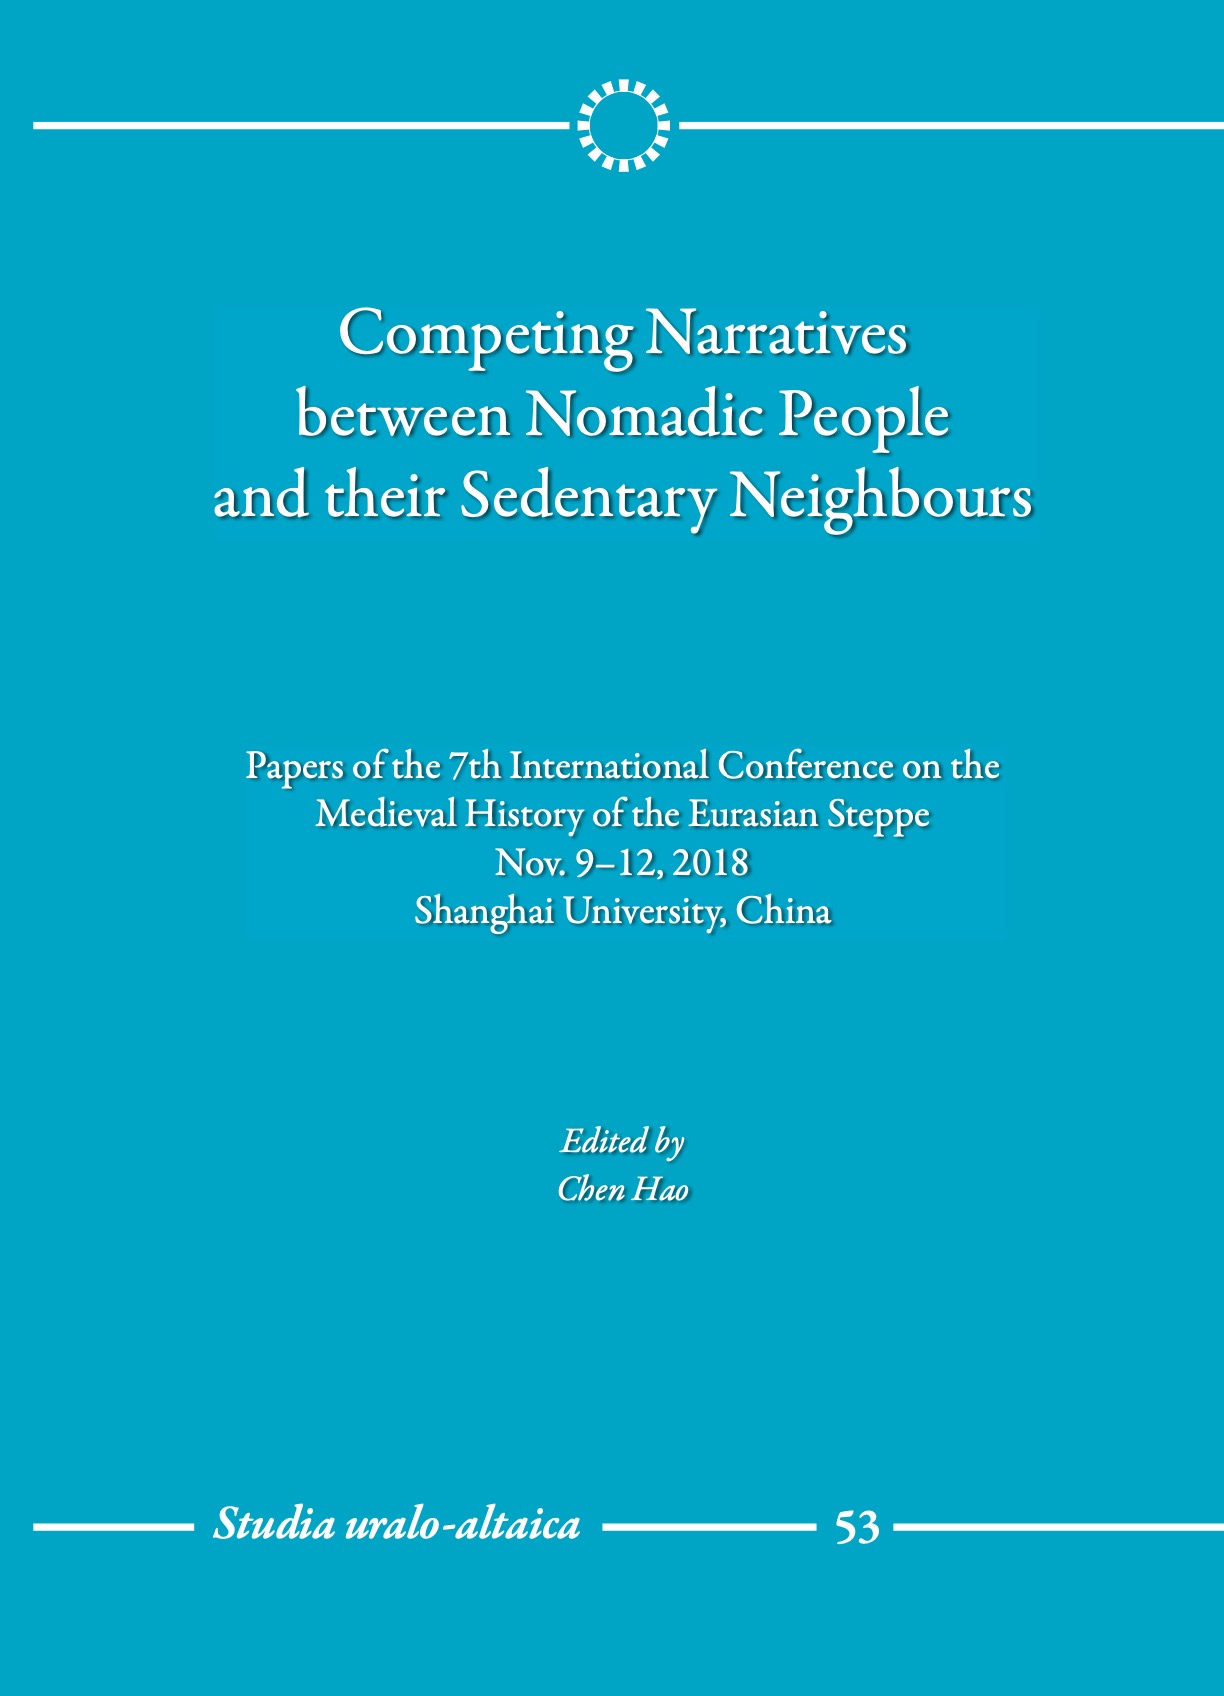 					View Vol. 53 (2019): Competing Narratives between Nomadic People and their Sedentary Neighbours
				